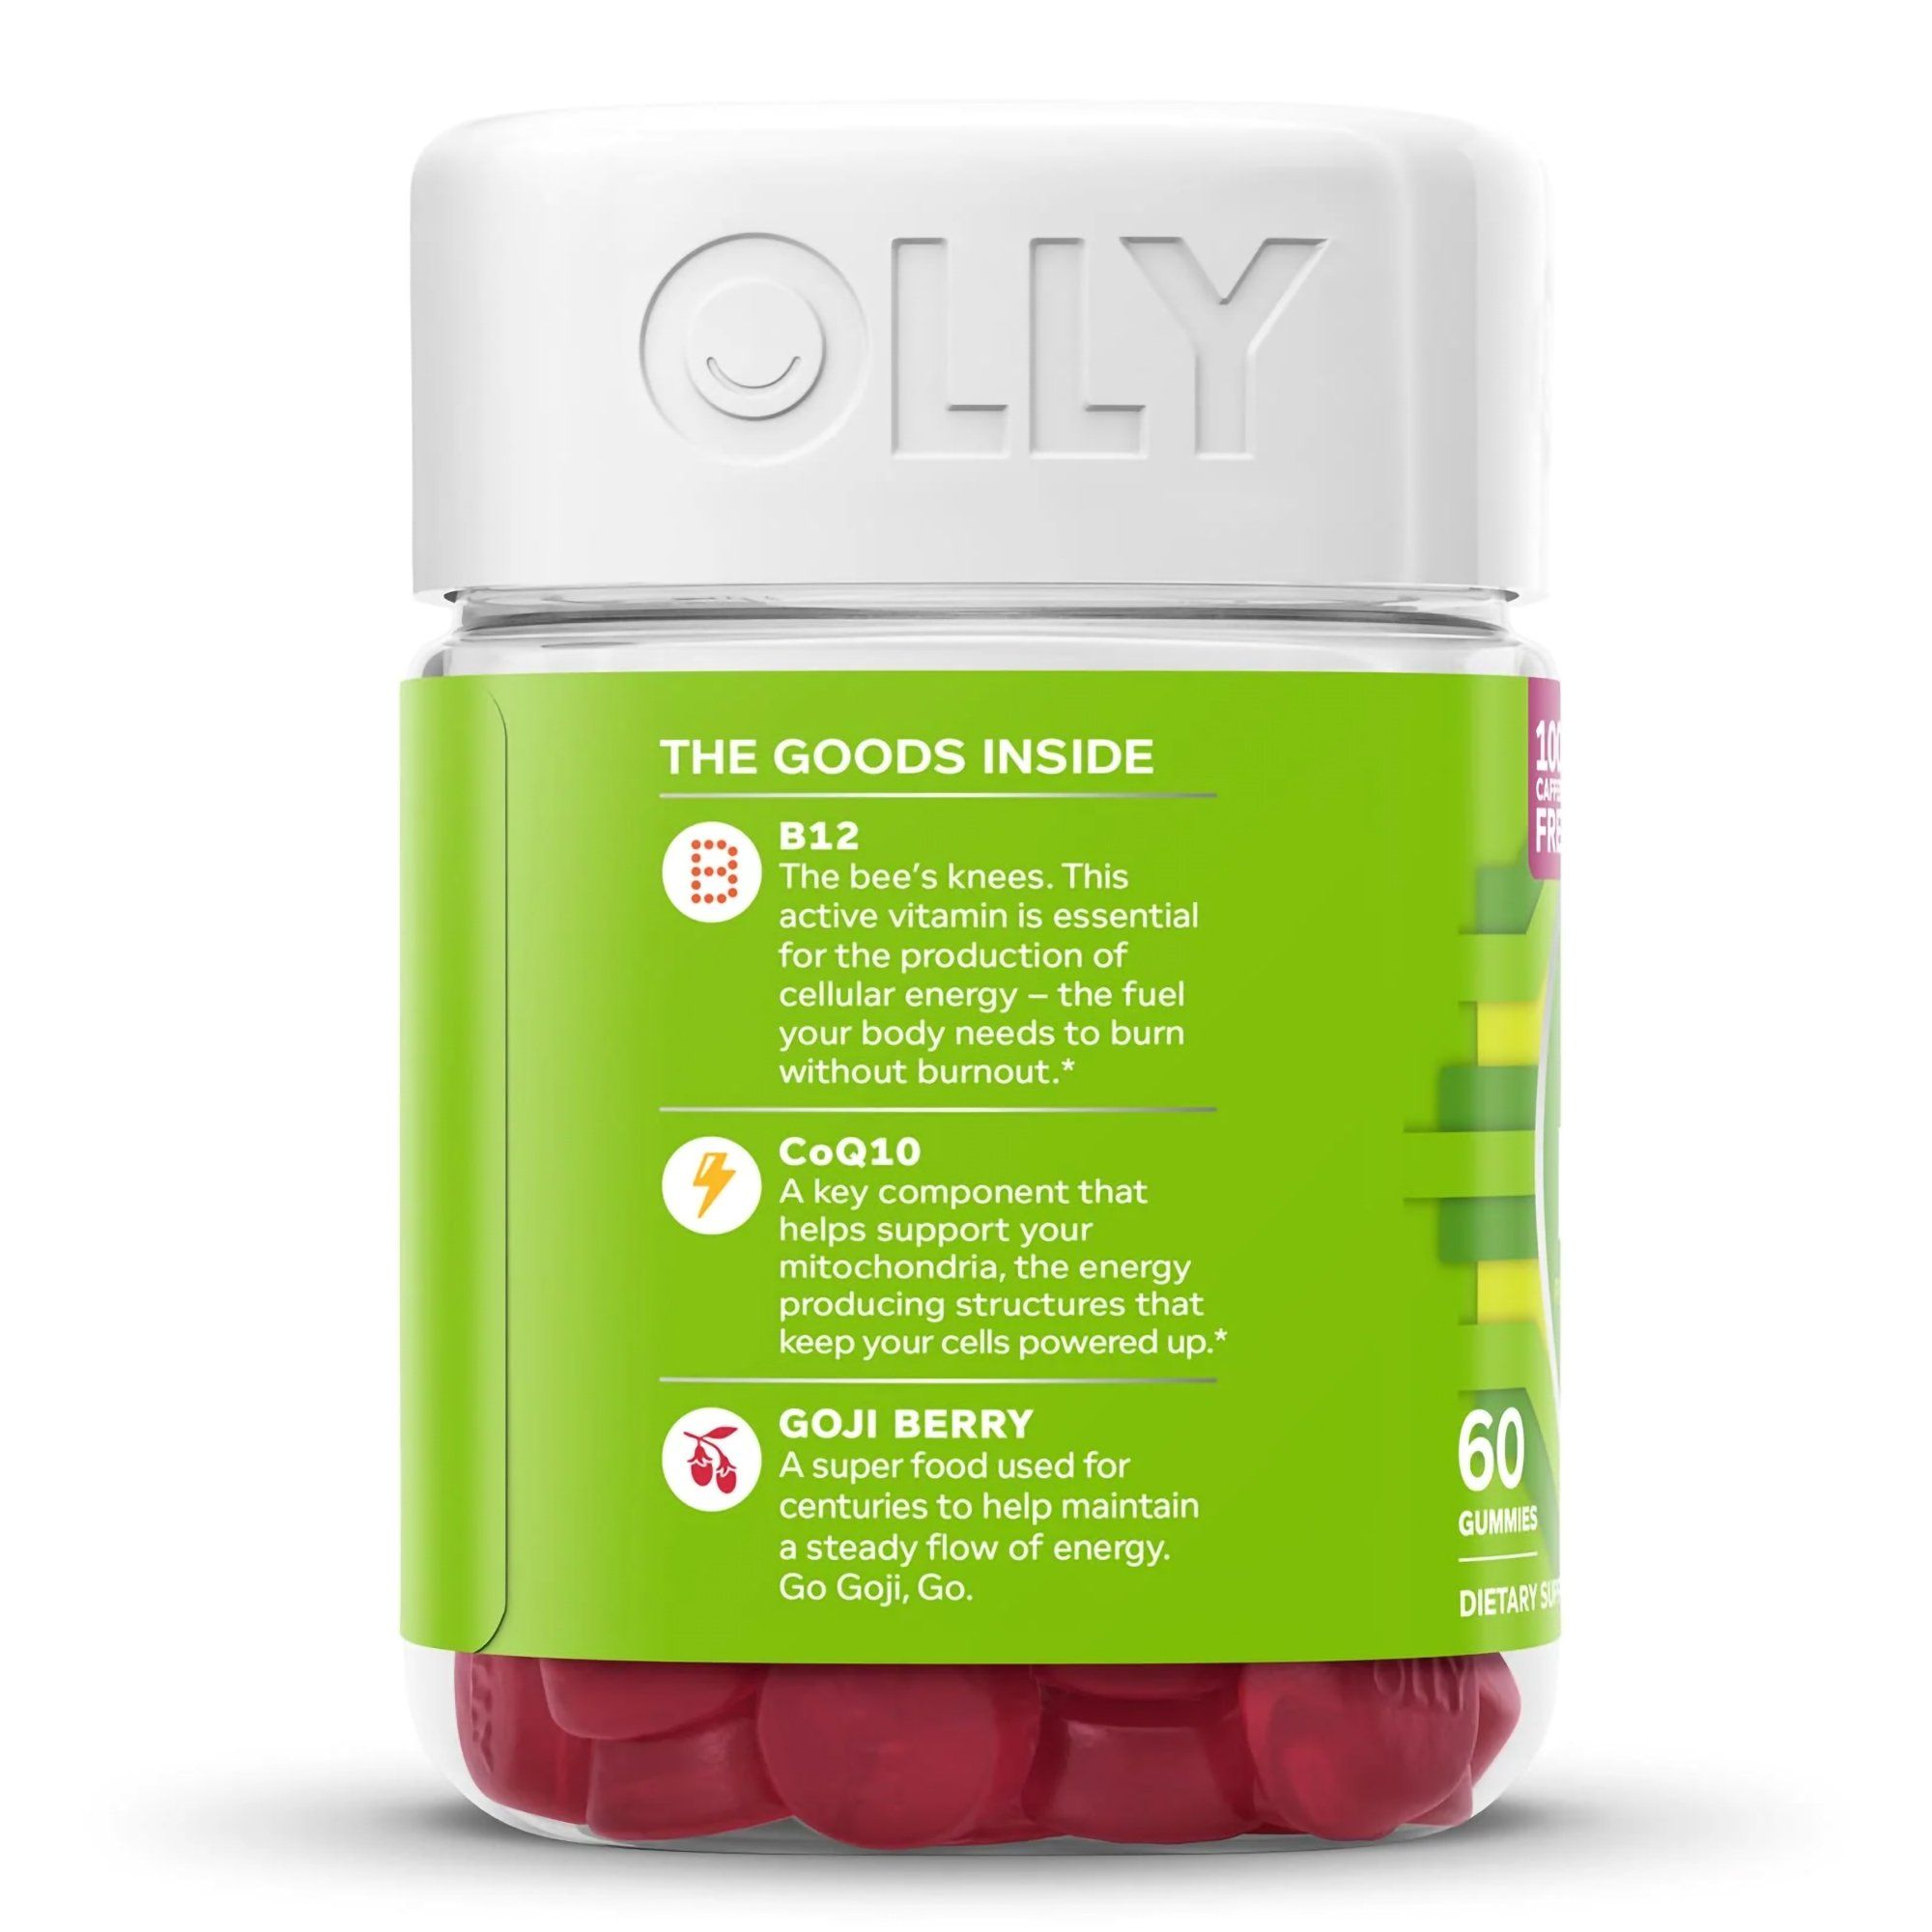 OLLY Daily Energy Gummy with CoQ10, B12 & Goji Berry, Caffeine Free, Tropical Passion - 60 ct